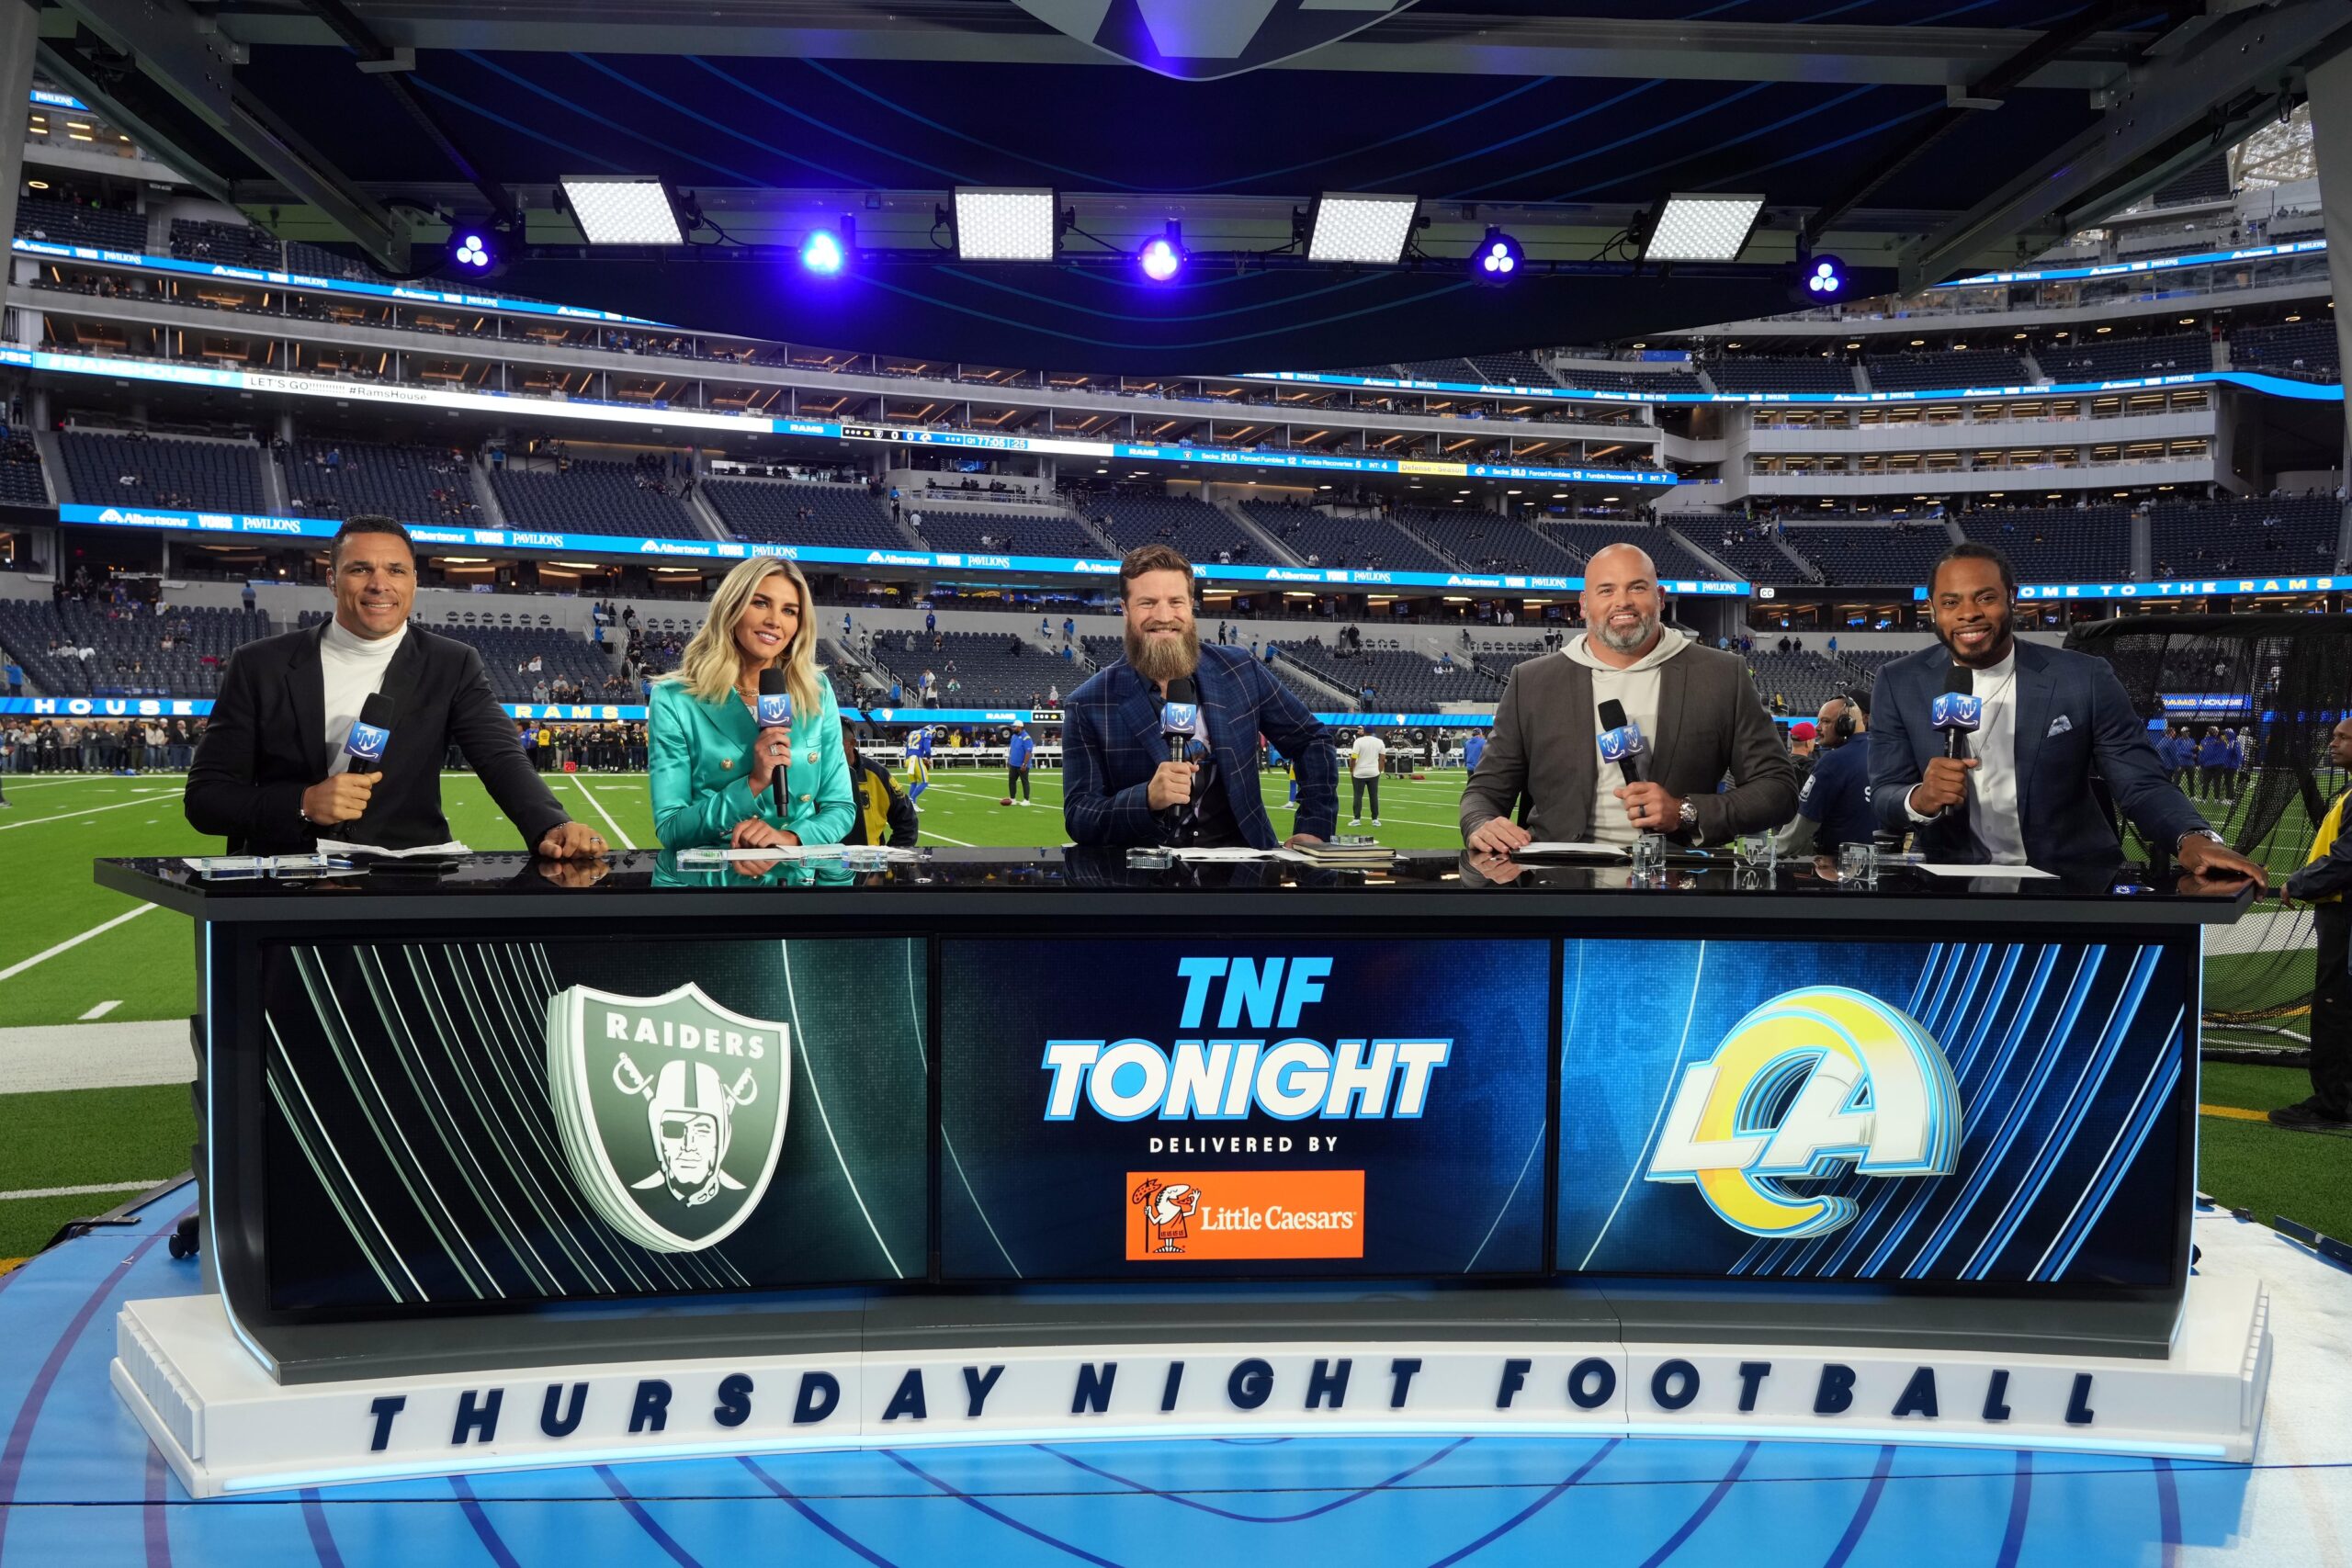 what channel is tonight's thursday night football on